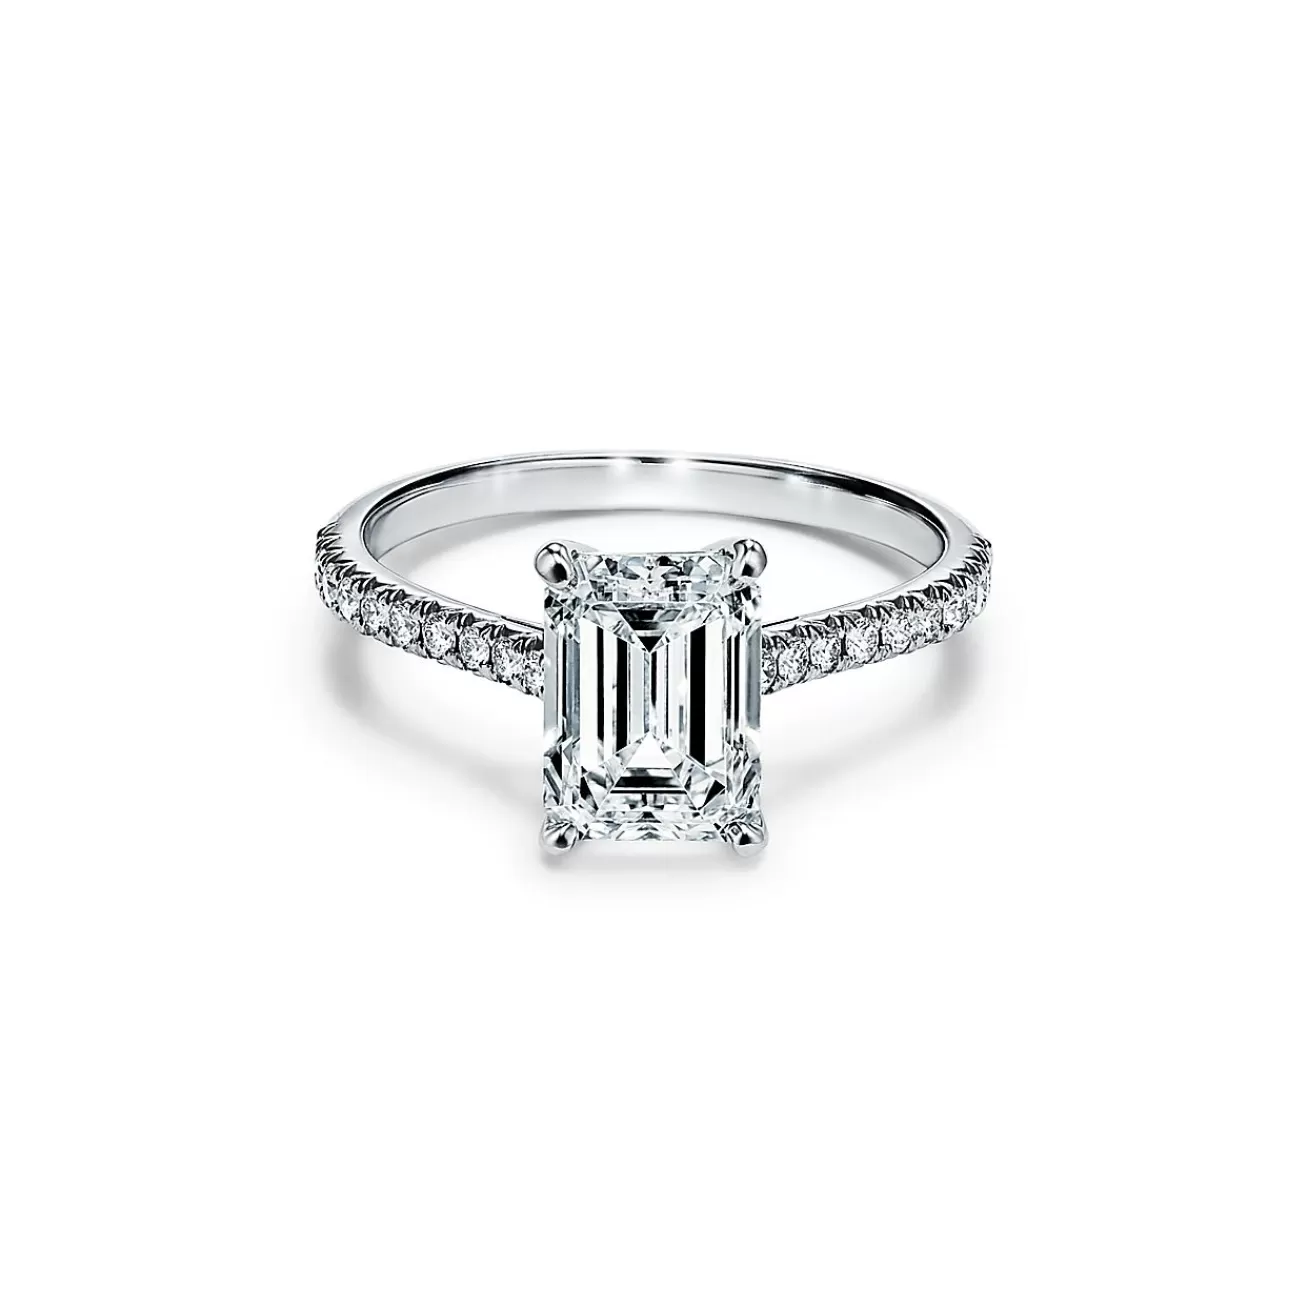 Tiffany & Co. Tiffany Novo® emerald-cut engagement ring with a pavé diamond band in platinum. | ^ Engagement Rings